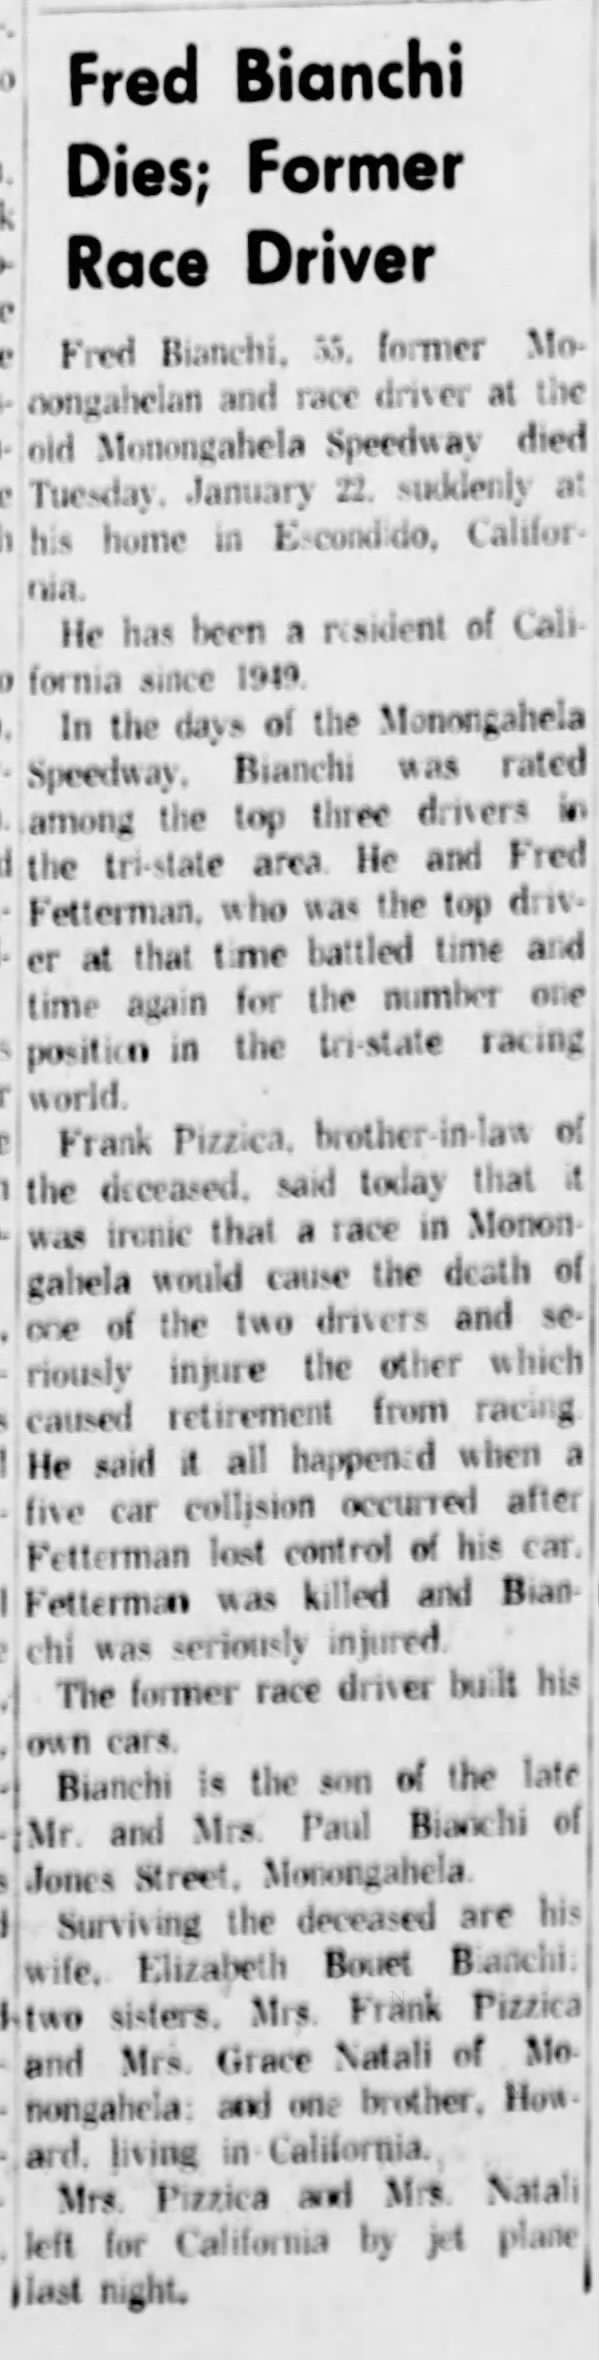 Fred Bianchi obit
The Daily Republican
24 January 1963